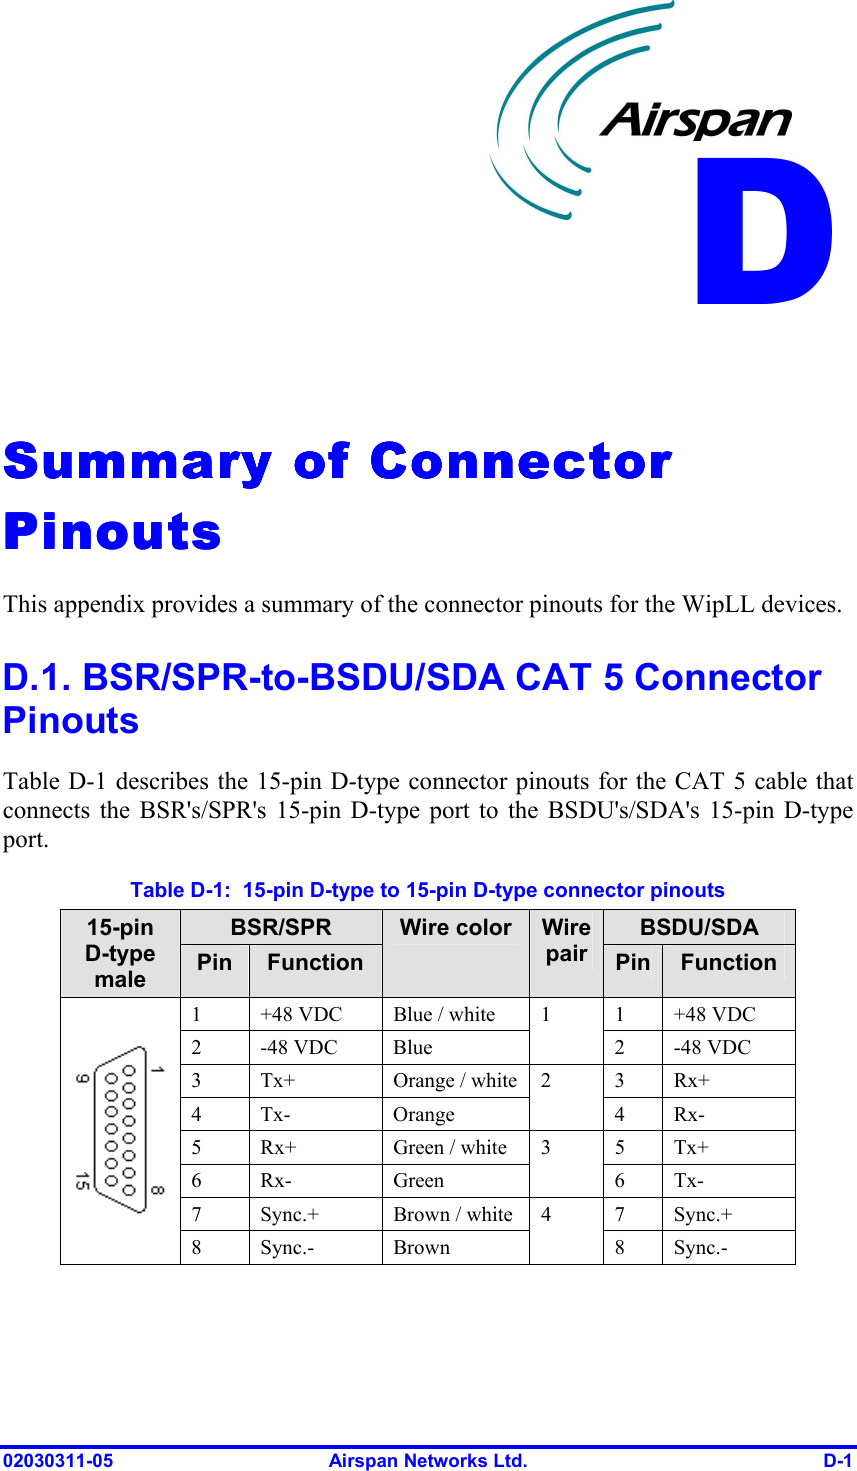  02030311-05  Airspan Networks Ltd.  D-1   Summary of Connector Summary of Connector Summary of Connector Summary of Connector PinoutsPinoutsPinoutsPinouts    This appendix provides a summary of the connector pinouts for the WipLL devices. D.1. BSR/SPR-to-BSDU/SDA CAT 5 Connector Pinouts  Table  D-1 describes the 15-pin D-type connector pinouts for the CAT 5 cable that connects the BSR&apos;s/SPR&apos;s 15-pin D-type port to the BSDU&apos;s/SDA&apos;s 15-pin D-type port. Table  D-1:  15-pin D-type to 15-pin D-type connector pinouts BSR/SPR  BSDU/SDA 15-pin D-type male  Pin  Function Wire color  Wire pair  Pin Function 1  +48 VDC  Blue / white  1  +48 VDC 2 -48 VDC Blue 1 2 -48 VDC 3  Tx+  Orange / white  3  Rx+ 4 Tx-  Orange 2 4 Rx- 5  Rx+  Green / white  5  Tx+ 6 Rx-  Green 3 6 Tx- 7  Sync.+  Brown / white  7  Sync.+  8 Sync.-  Brown  4 8 Sync.-  D